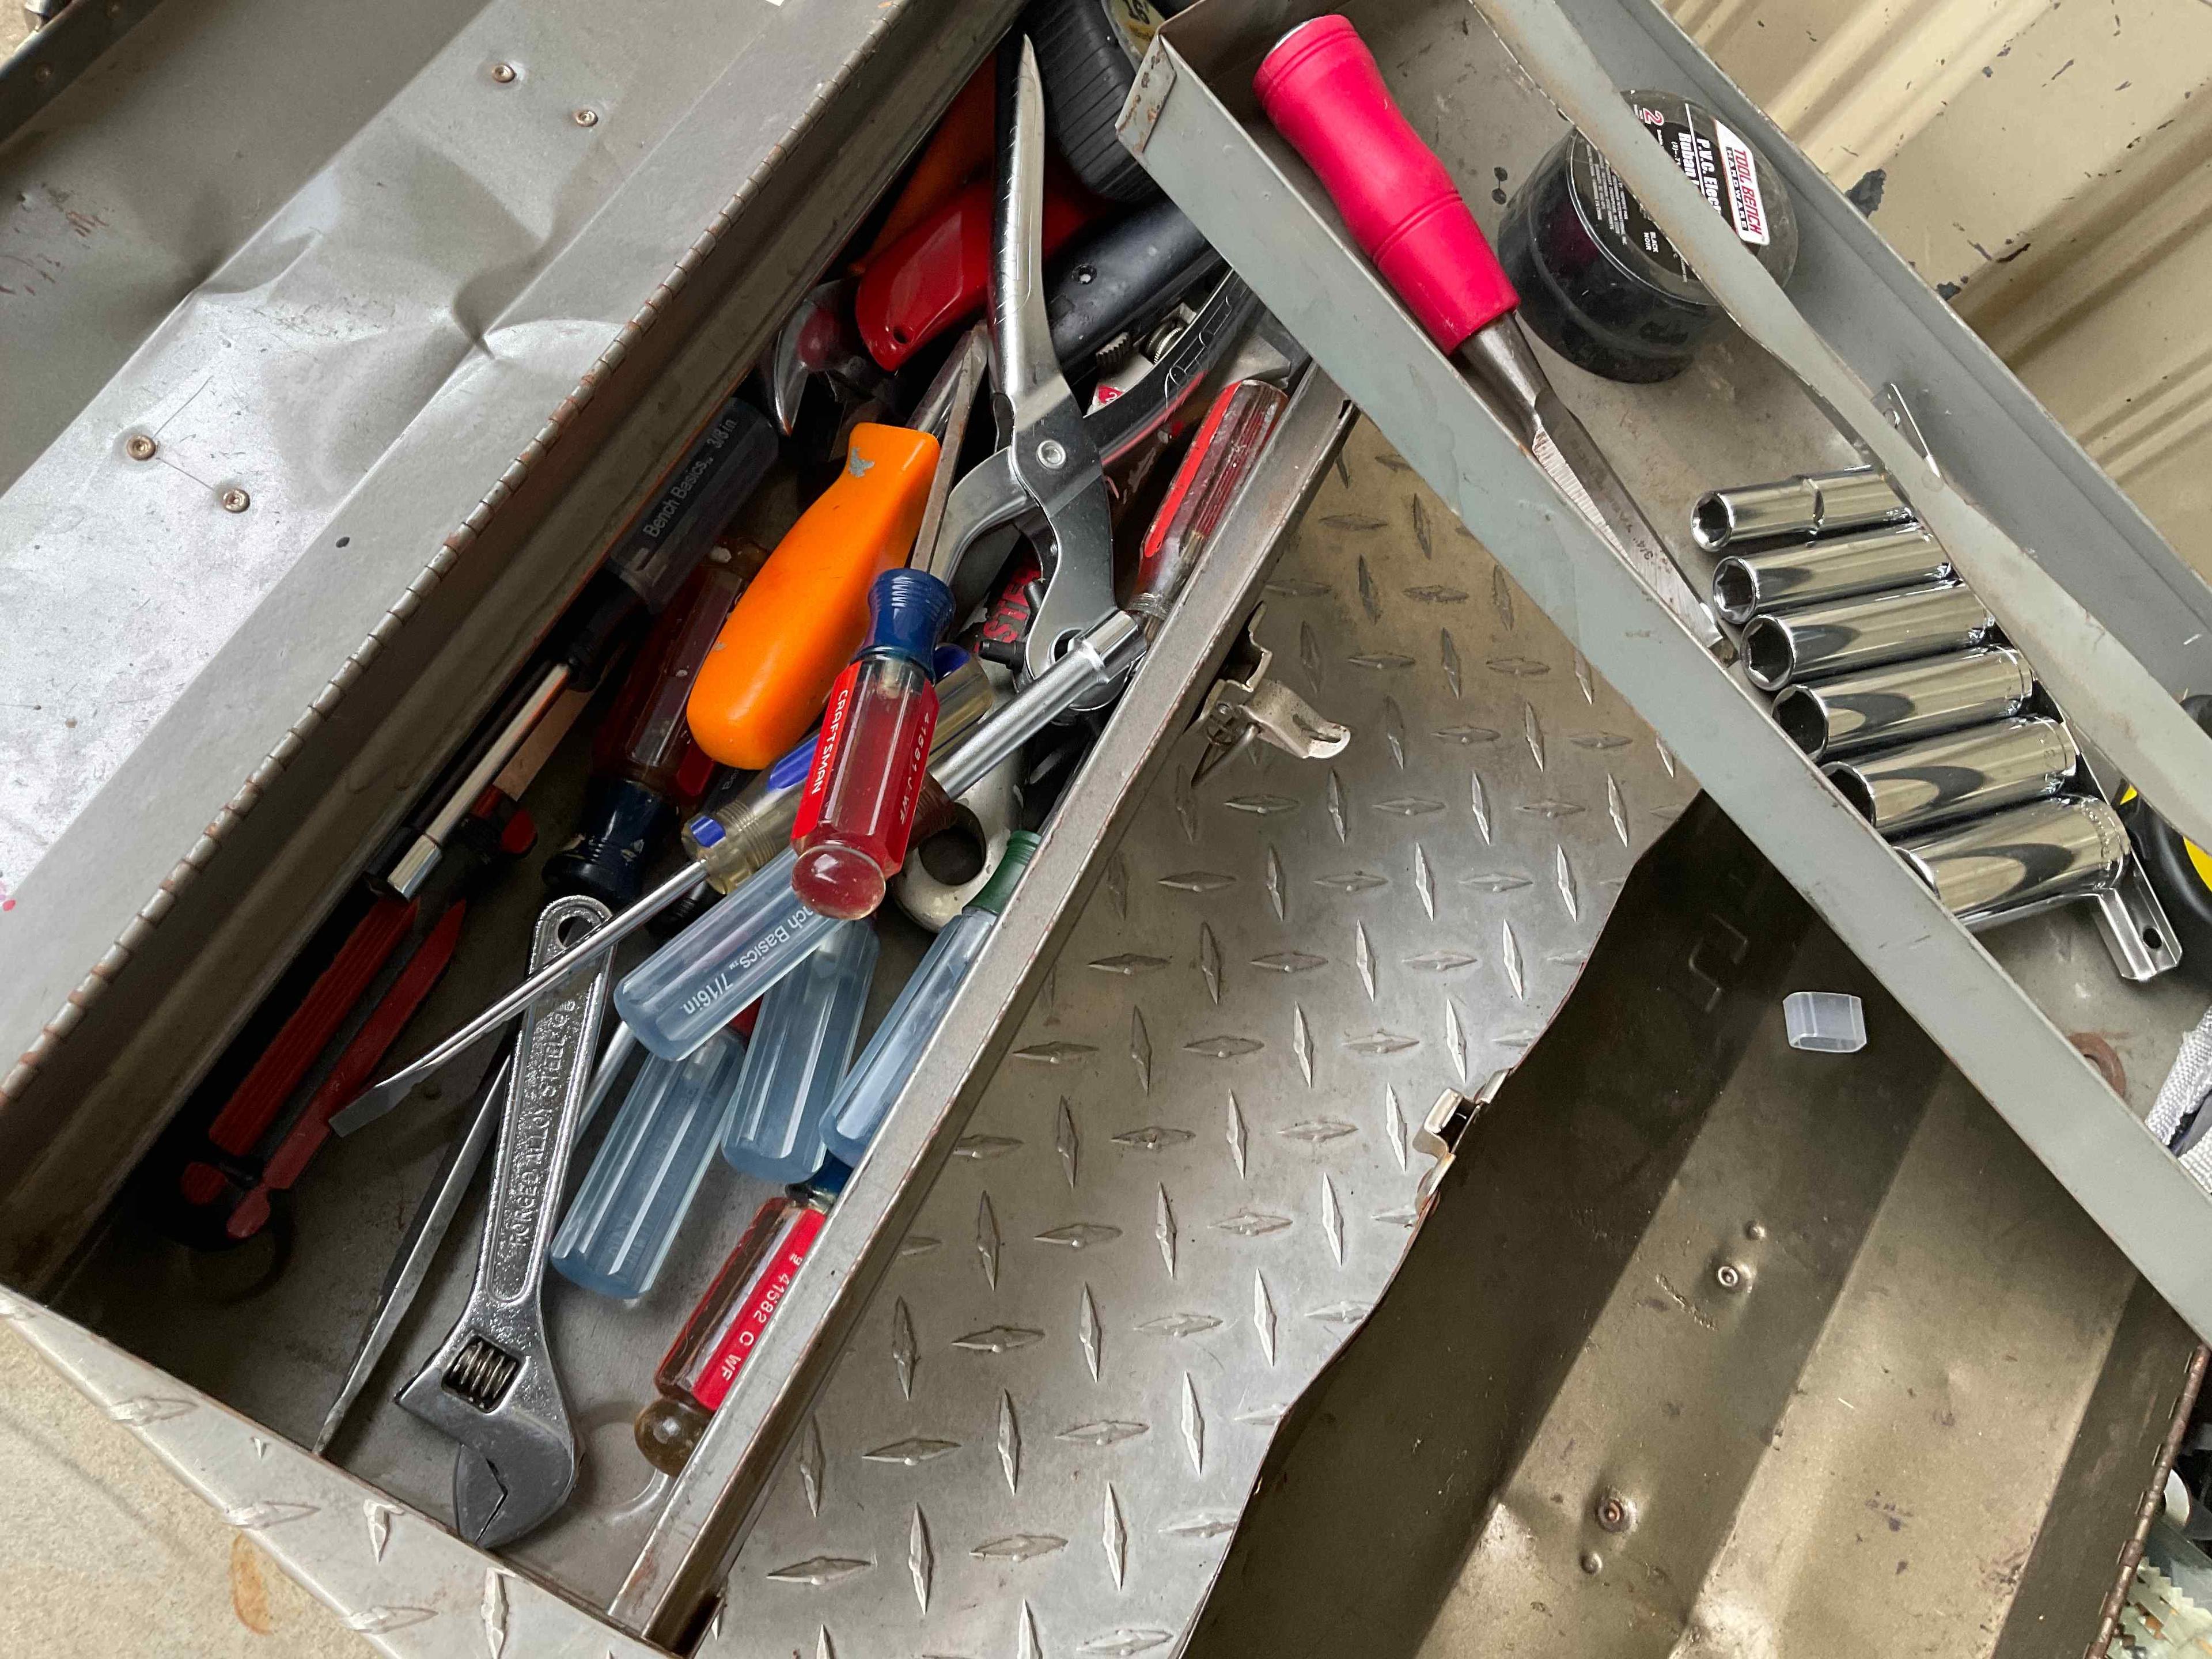 Tool Boxes, Tools